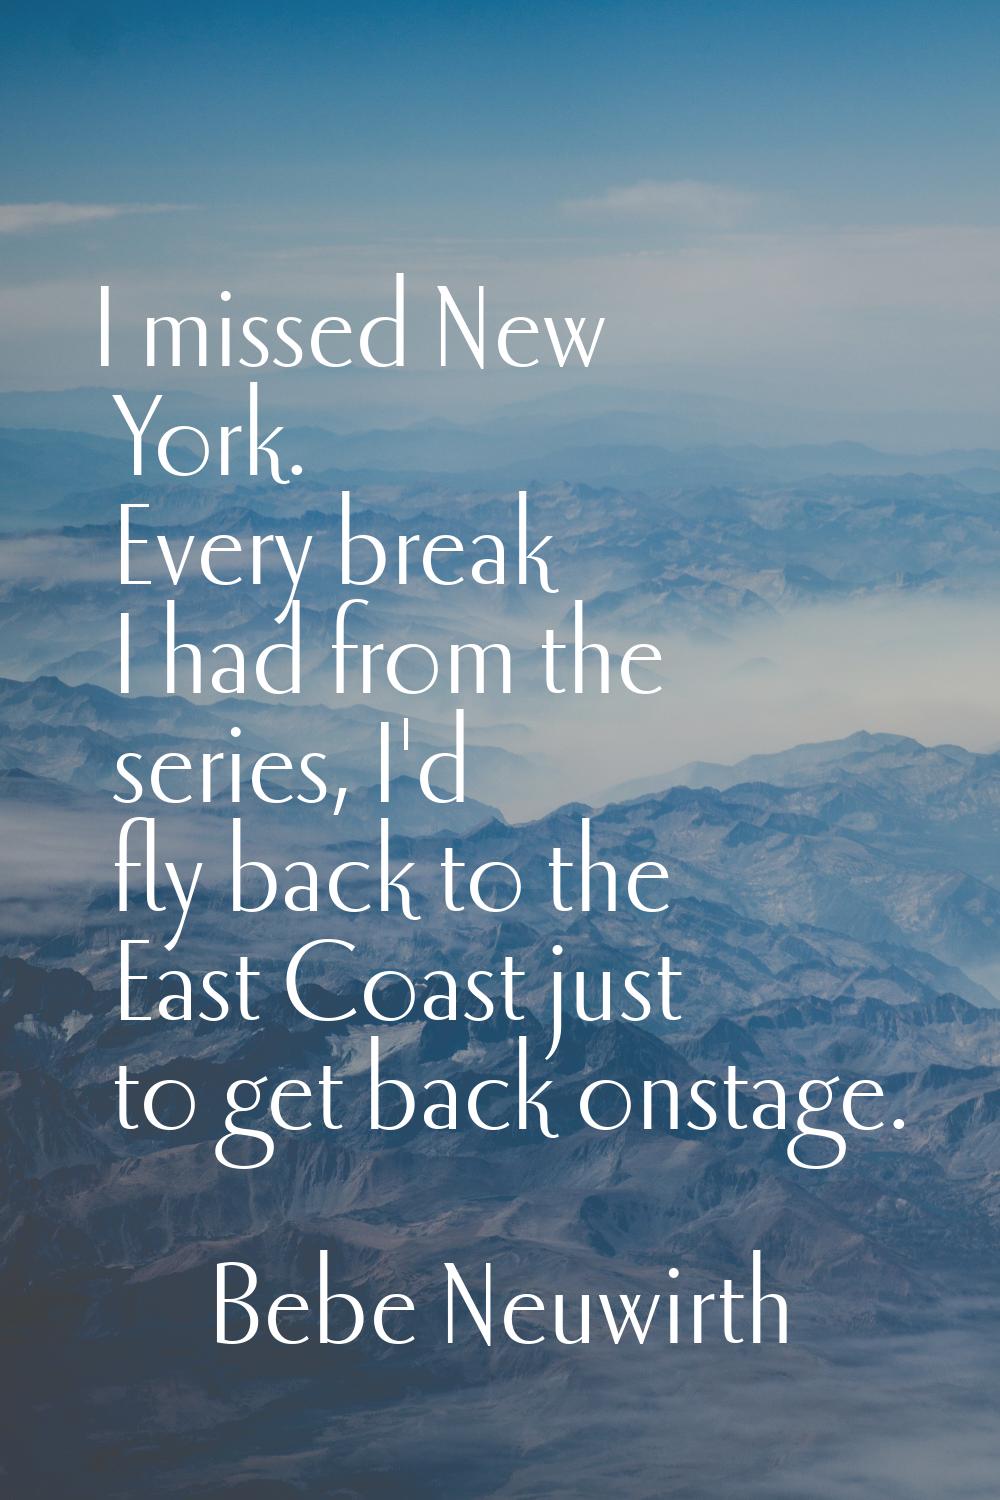 I missed New York. Every break I had from the series, I'd fly back to the East Coast just to get ba